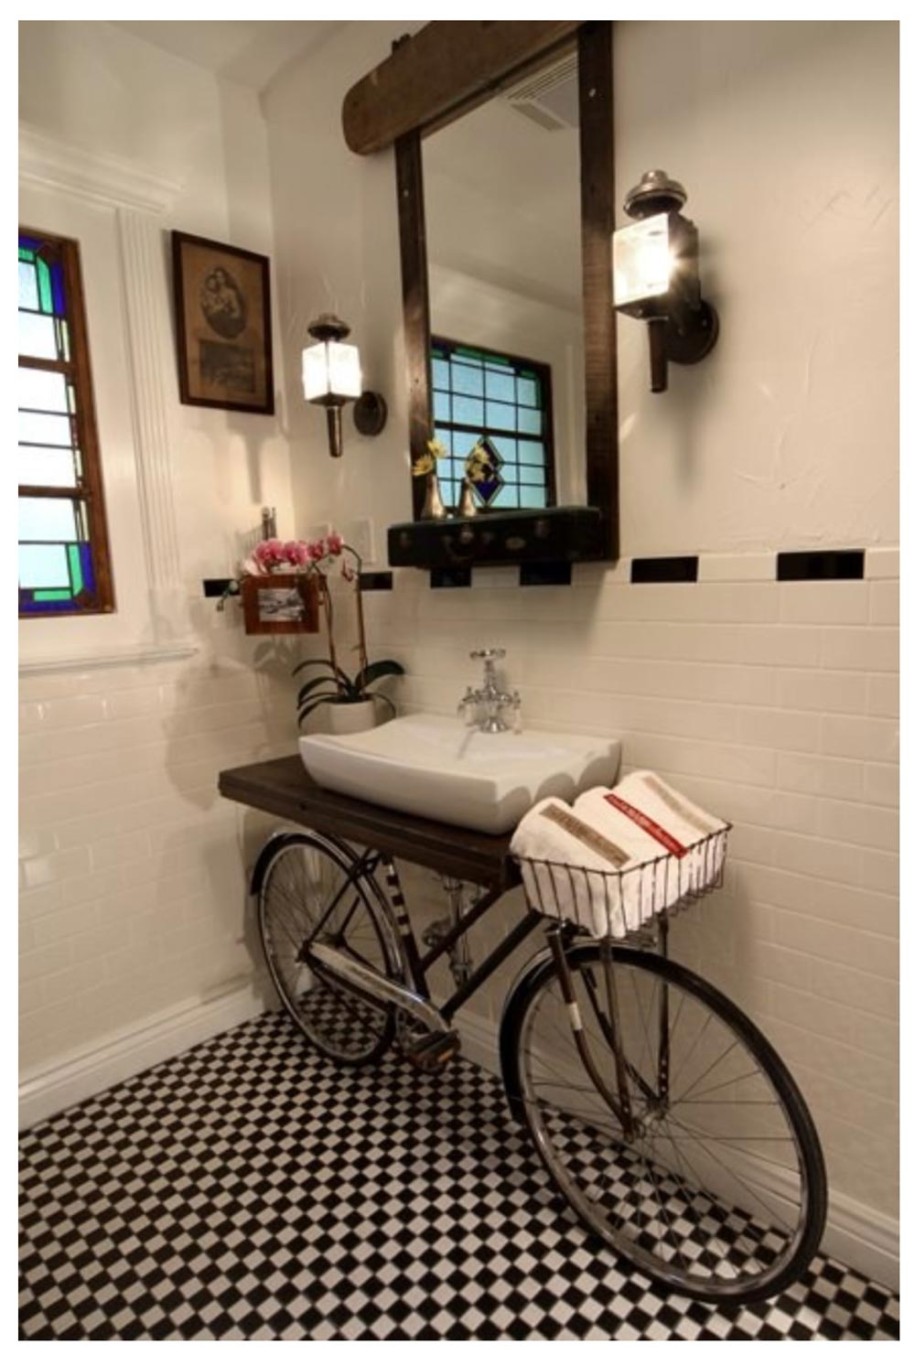 creative-white-sink-above-old-cycle-bathroom-design-ideas-for-guest-915x1355